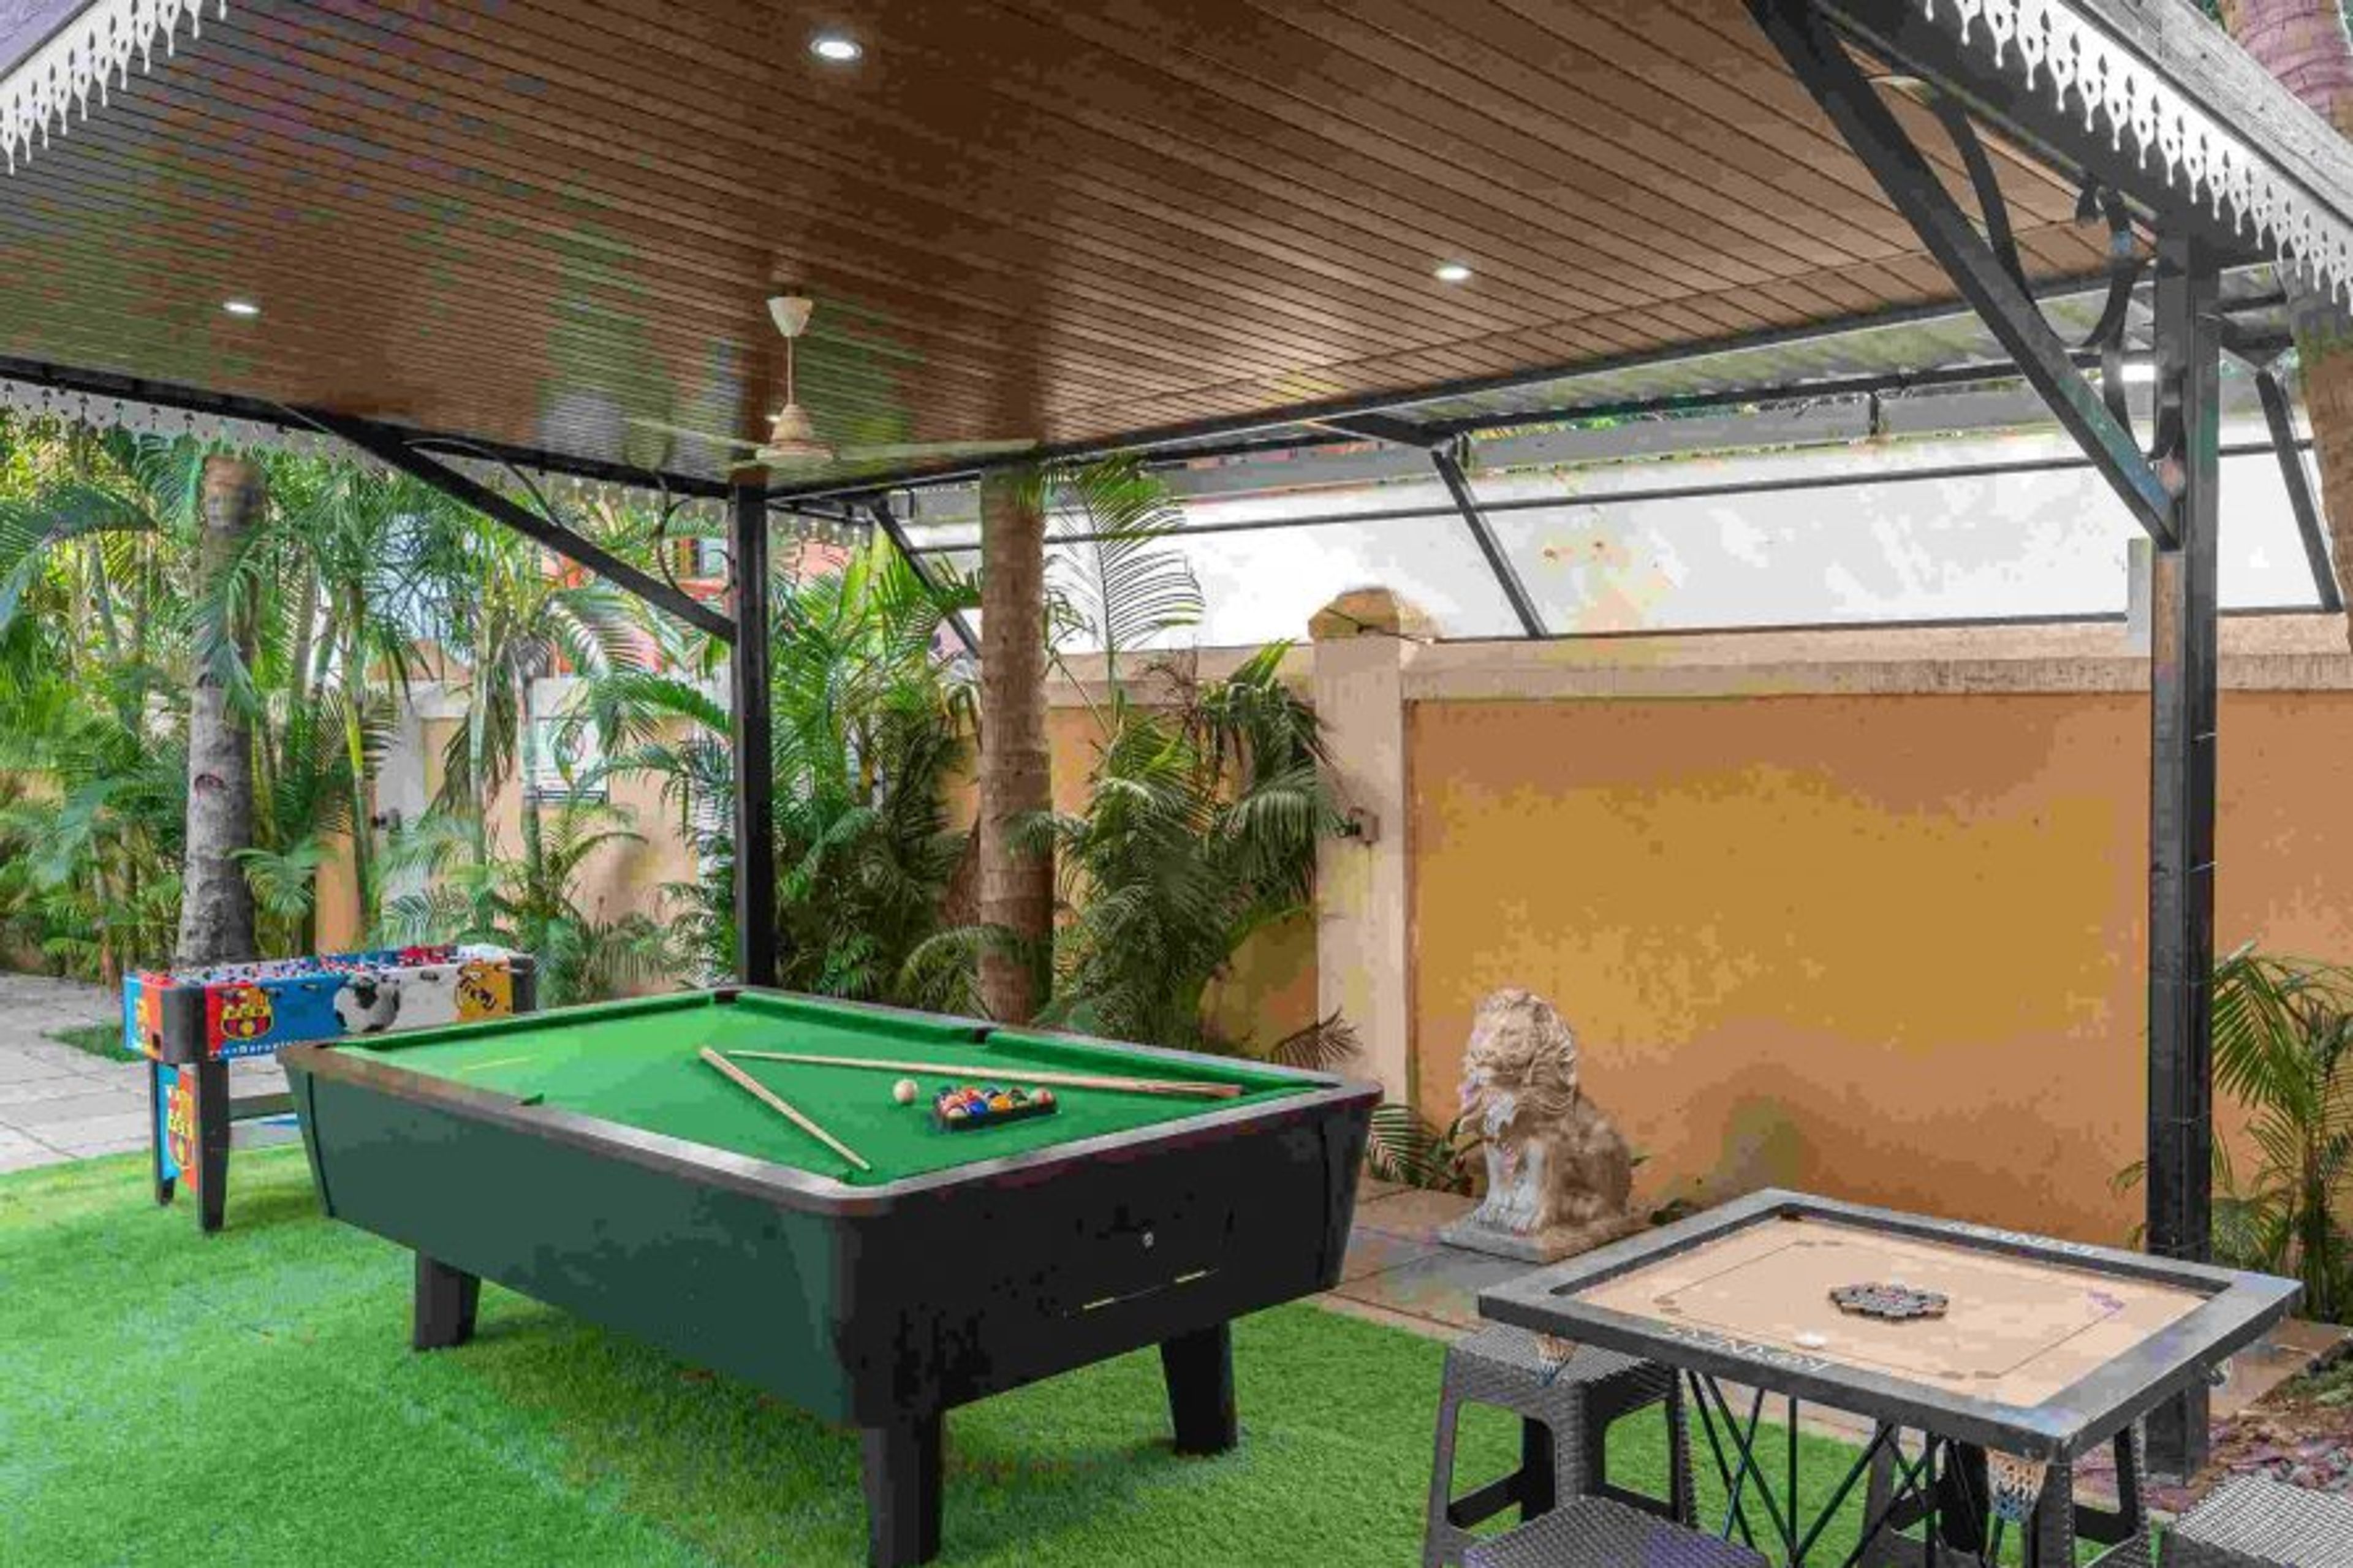 Play area with indoor games - foosball, carrom and pool table. 